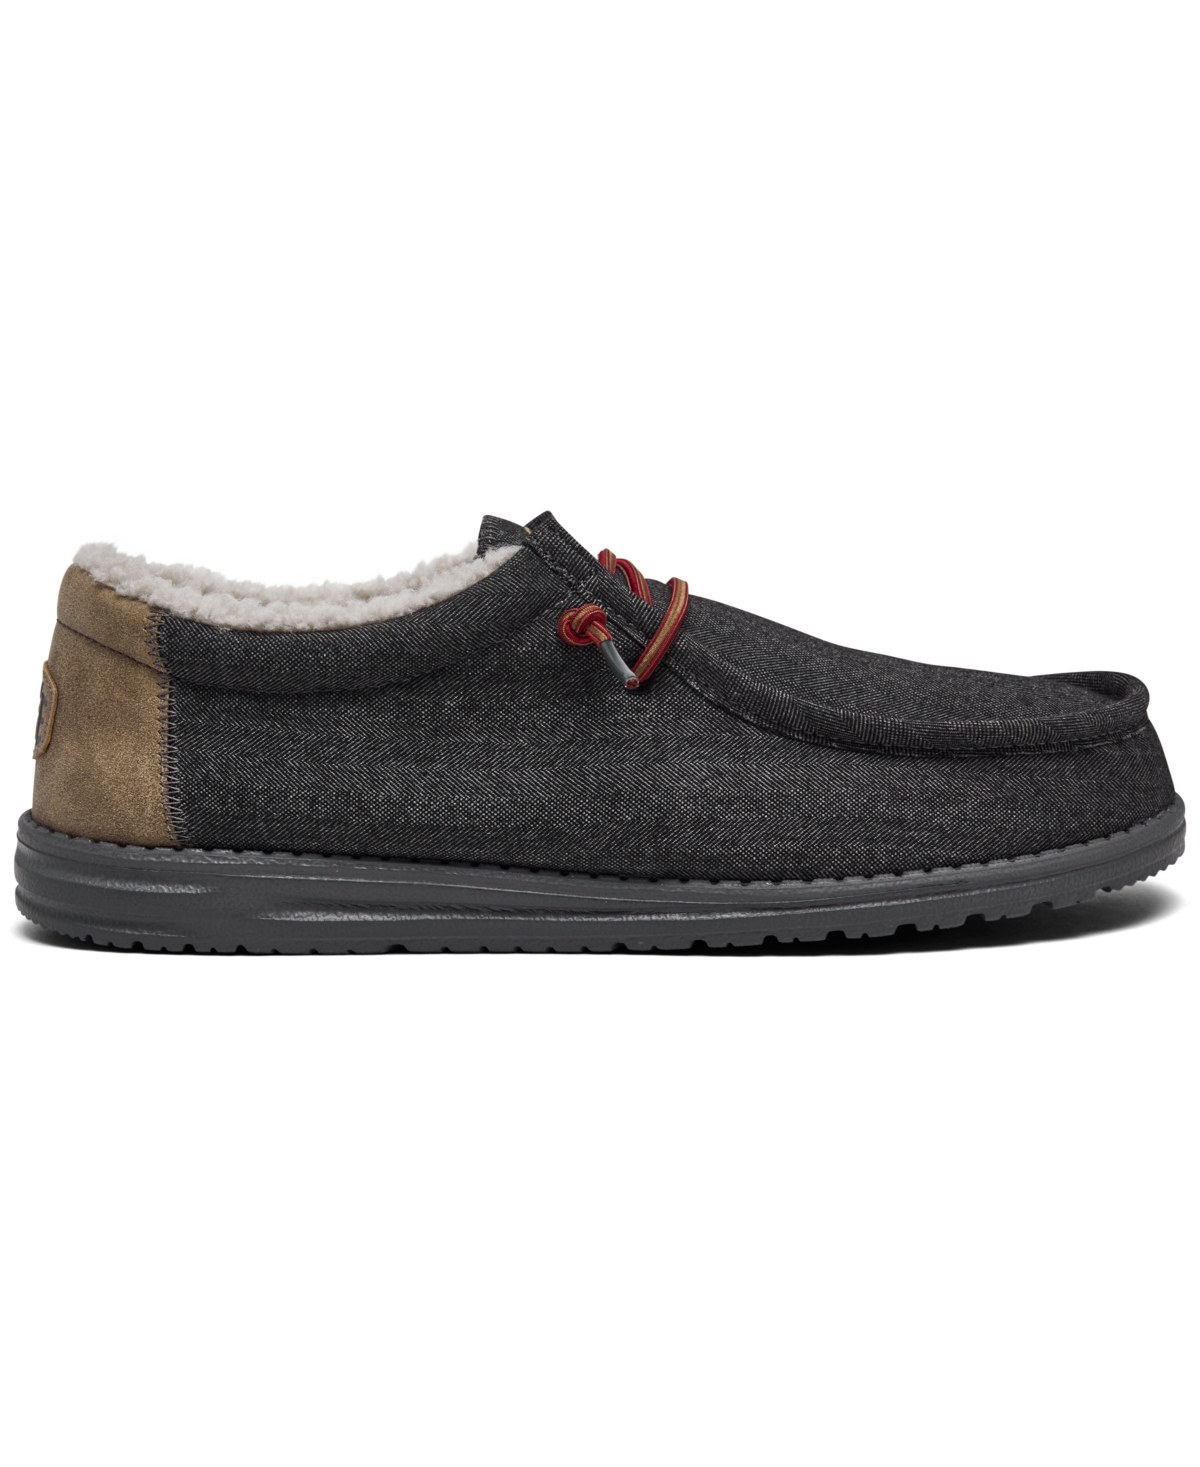 Shop Hey Dude Men's Wally Black Shell Casual Slip-on Moccasin Sneakers From Finish Line In Dark Gray